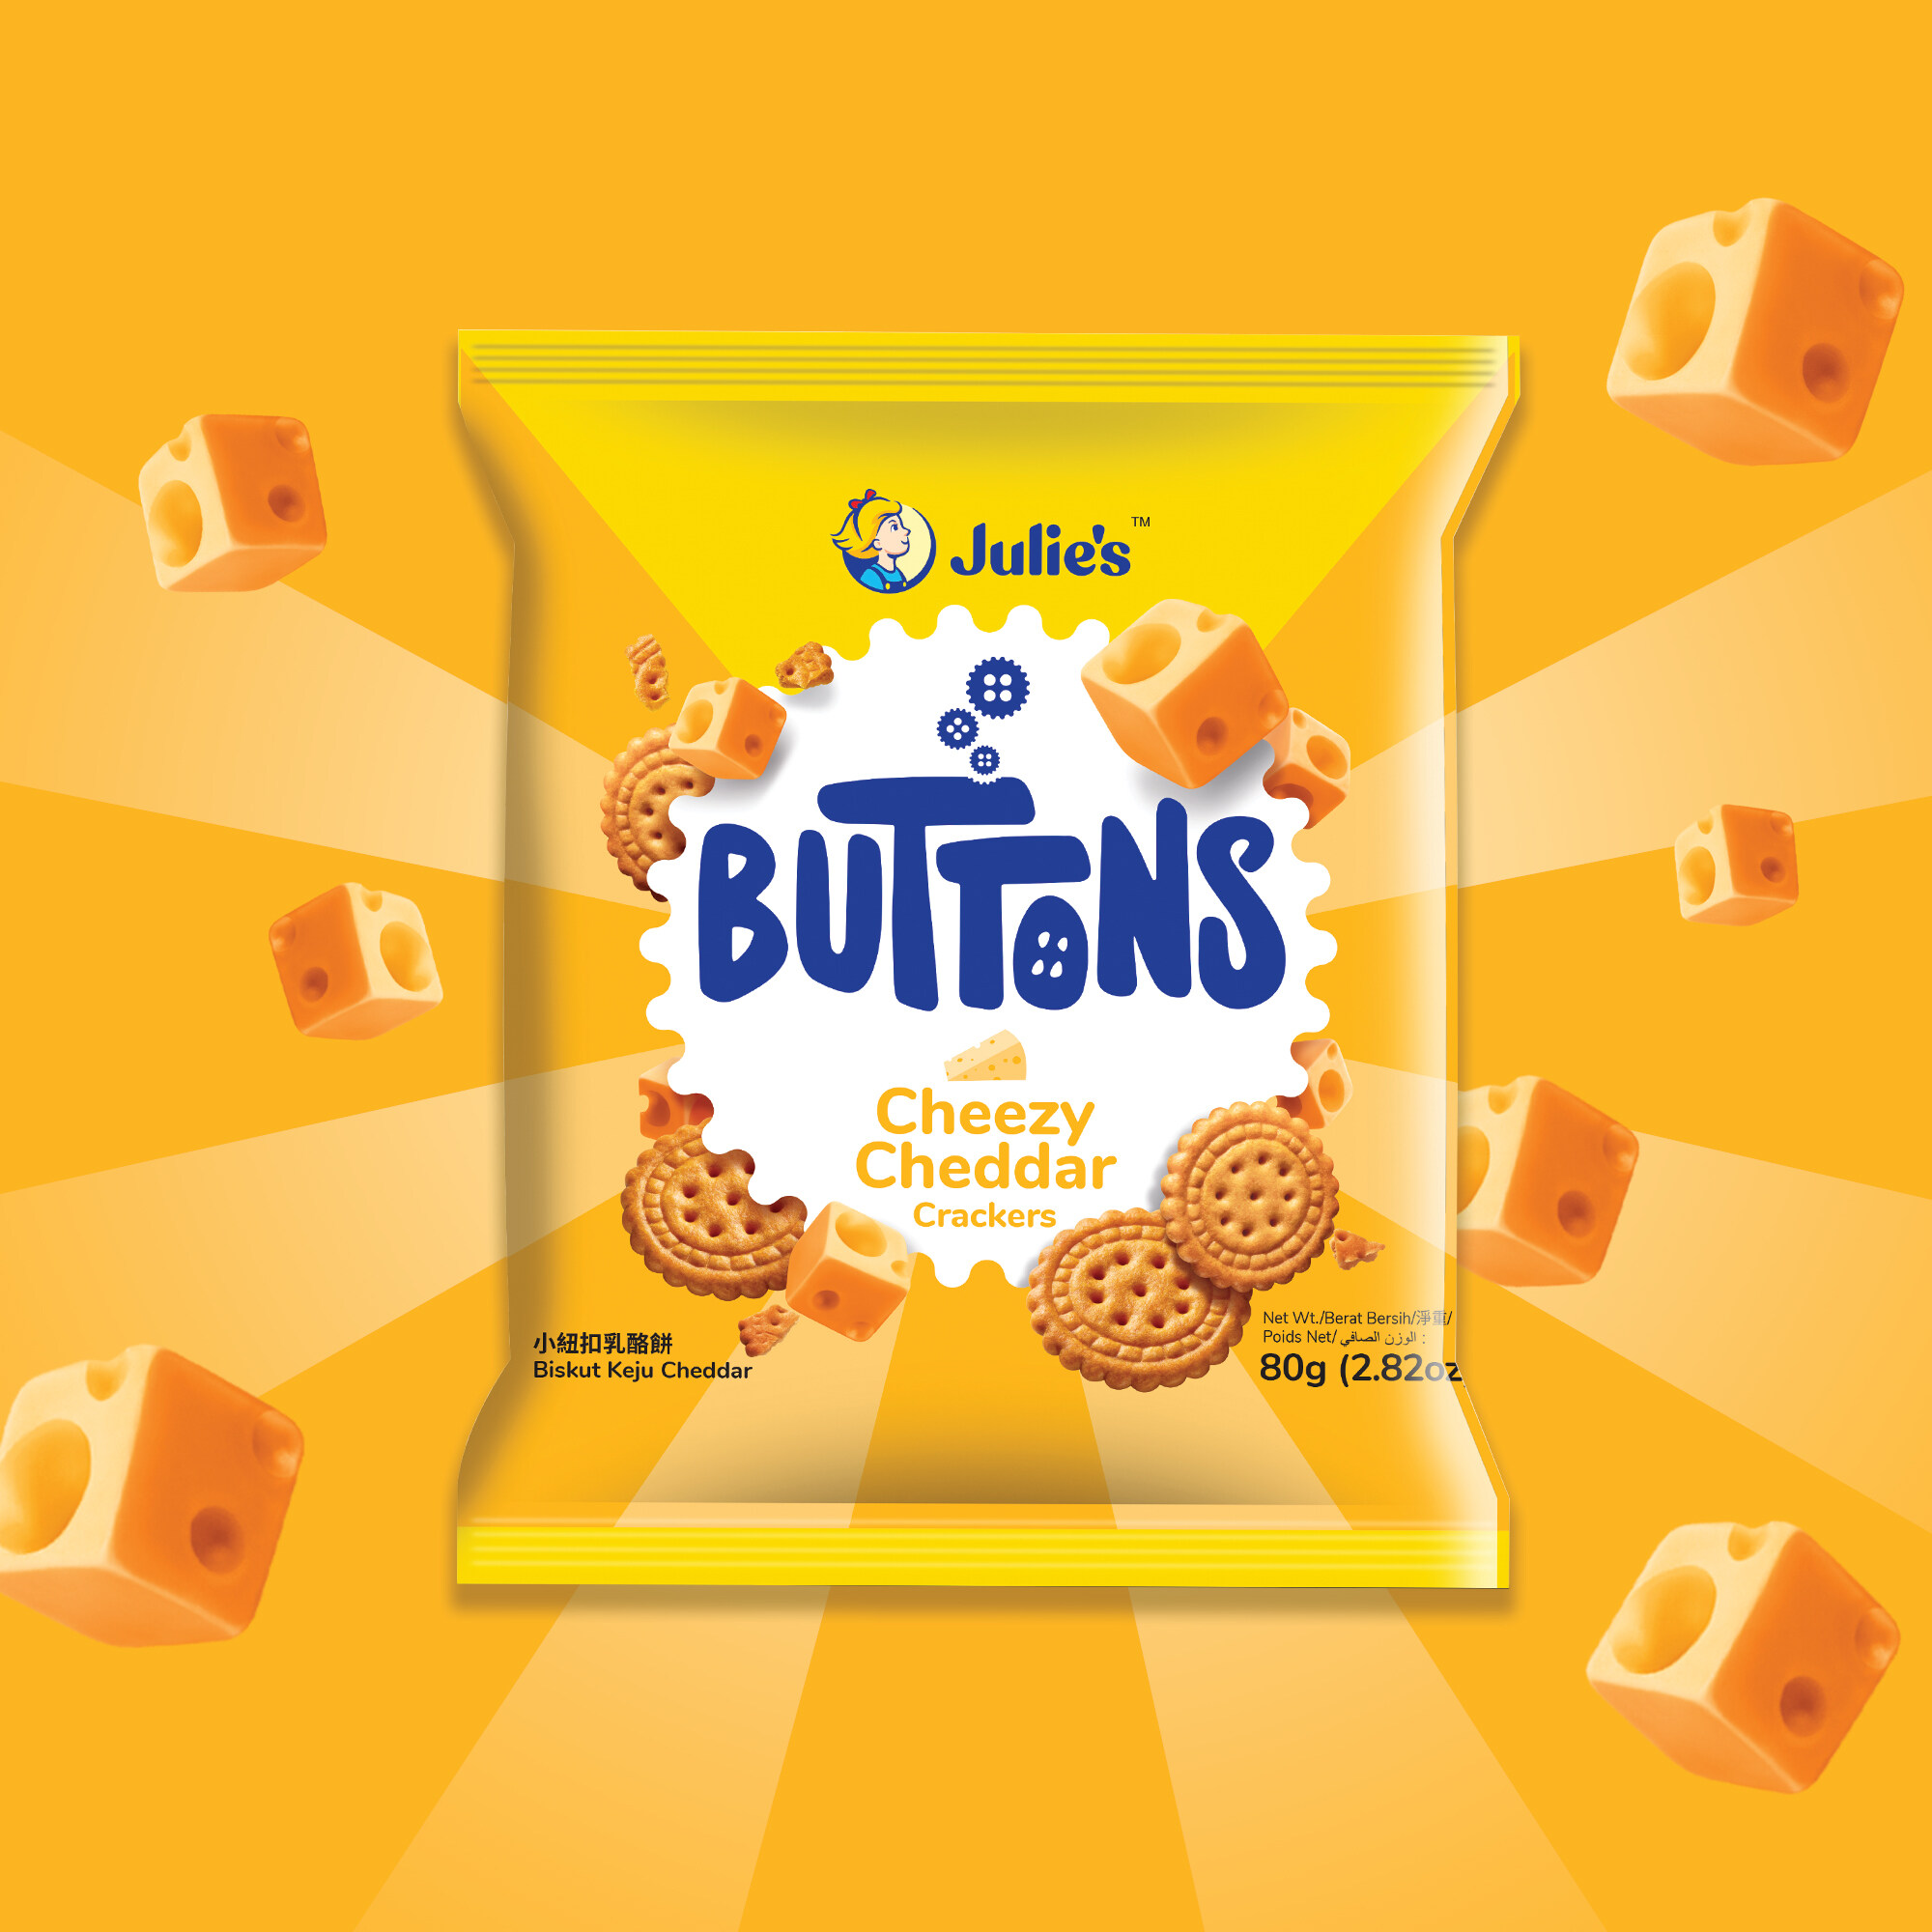 Julie's Buttons Cheezy Cheddar Crackers 80g x 1 pack